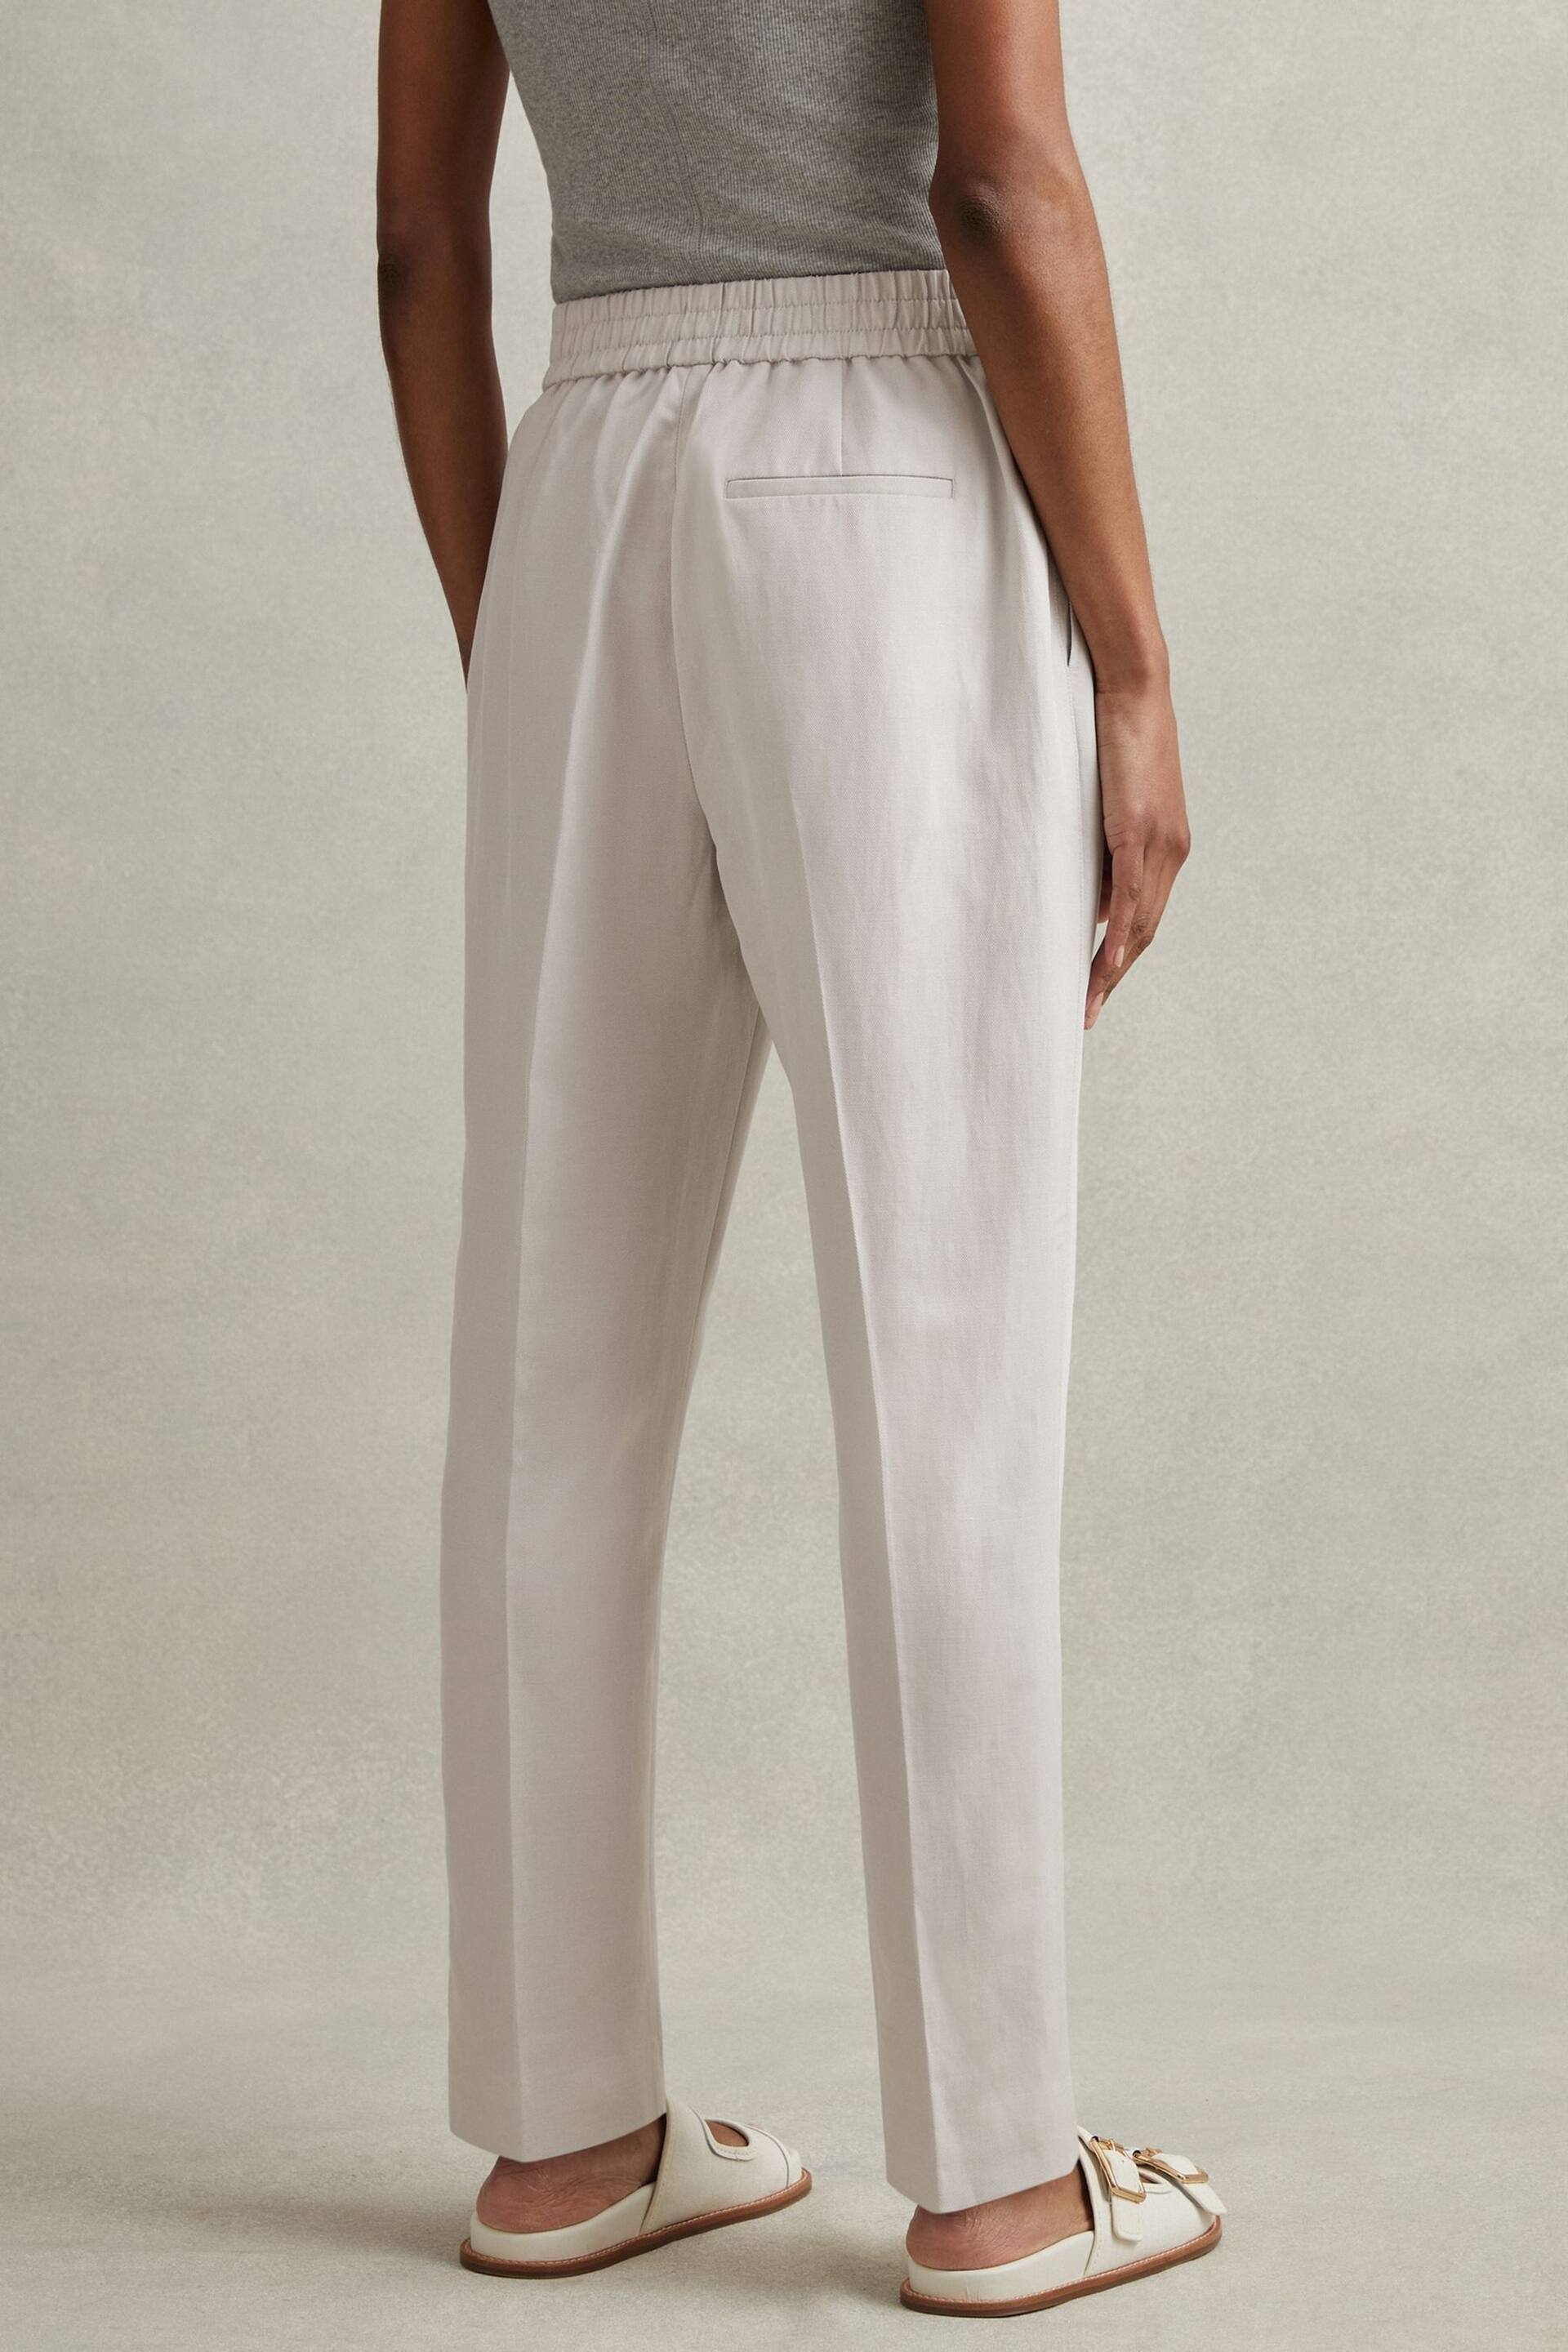 Reiss Light Grey Farrah Petite Tapered Suit Trousers with TENCEL™ Fibers - Image 3 of 7